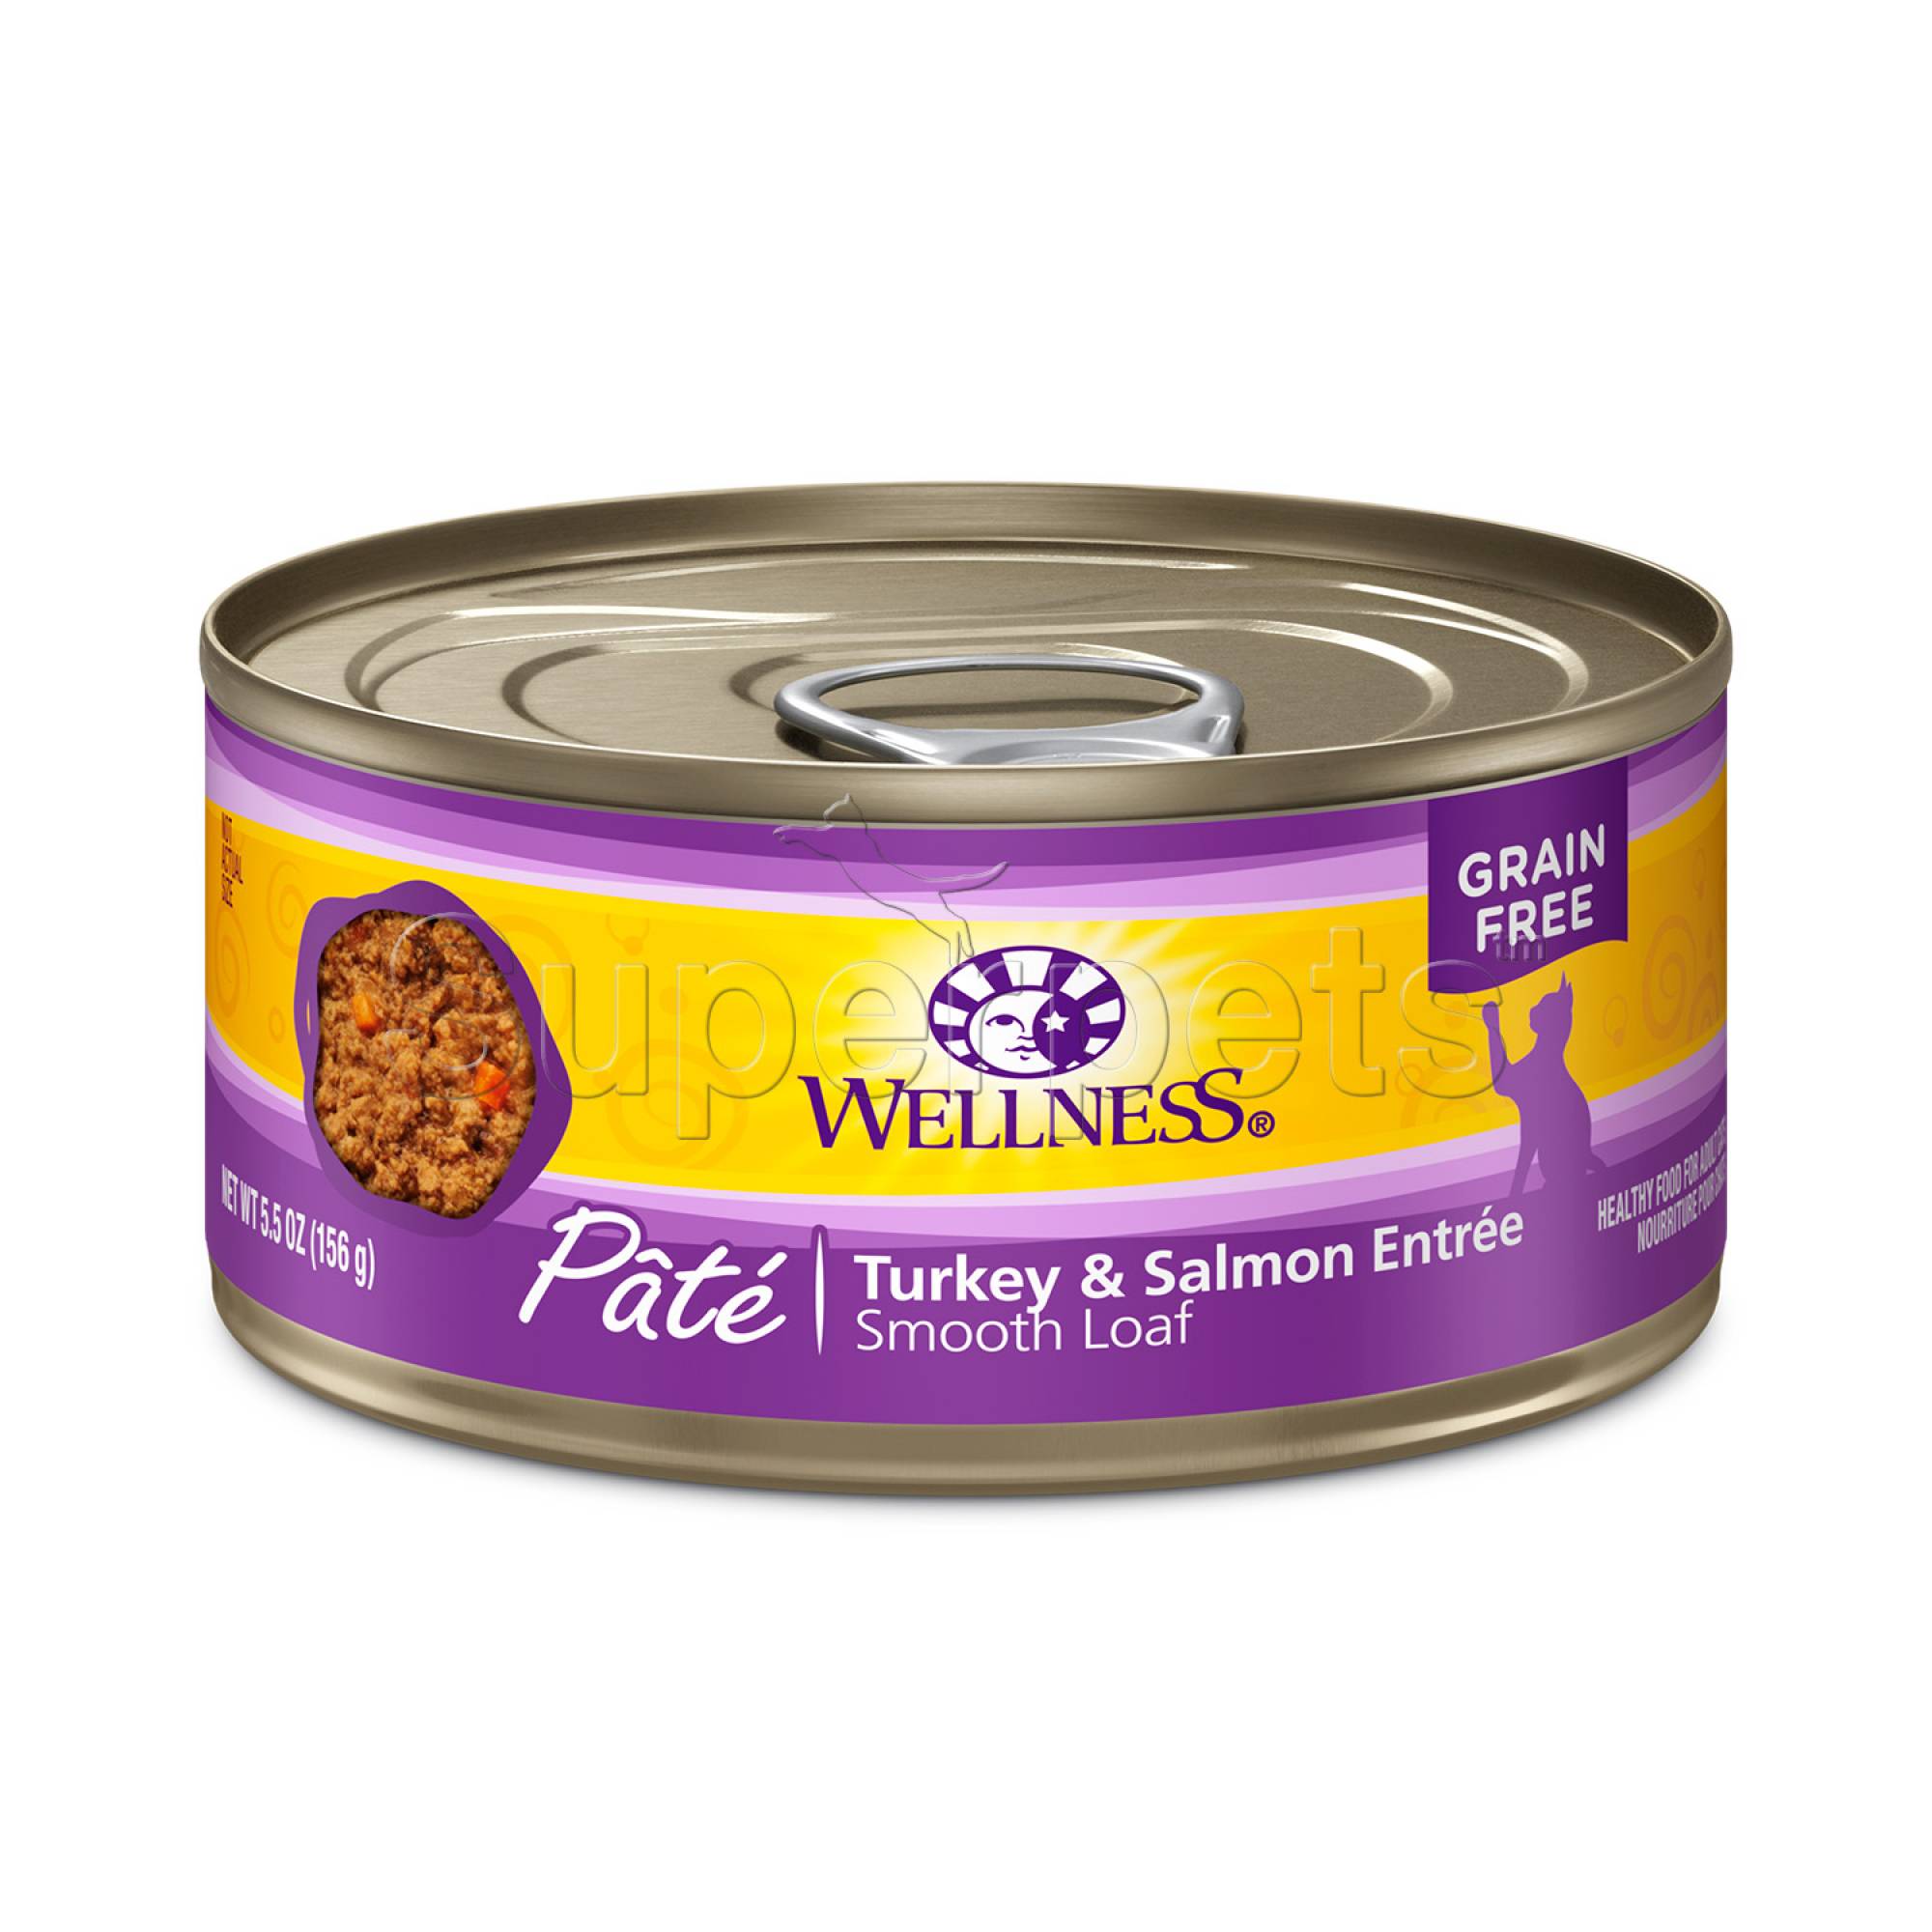 Wellness - Cat Complete Health Grain-Free 156g Pate Turkey & Salmon Entree Smooth Loaf